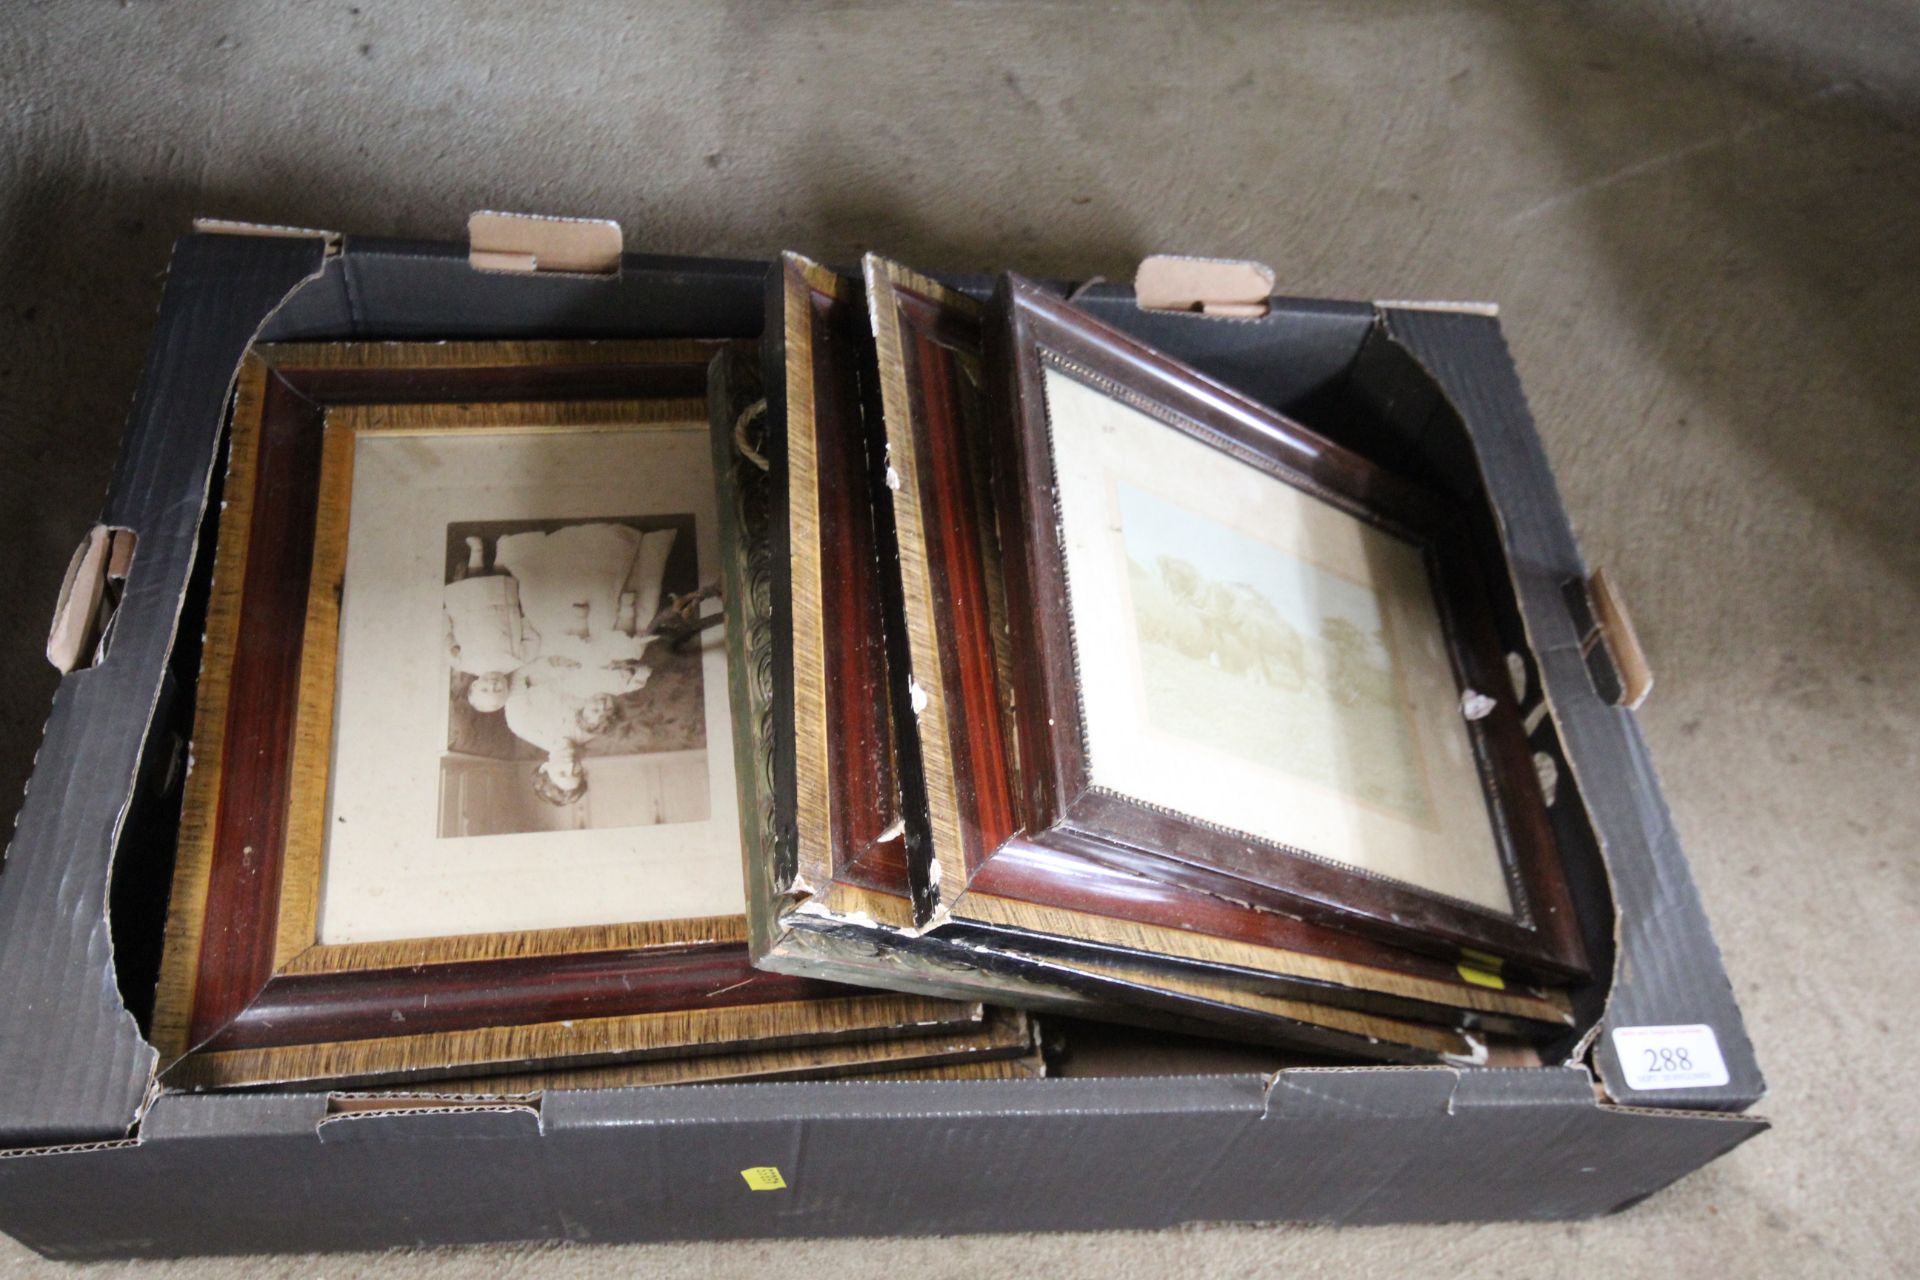 A collection of various vintage photographs depict